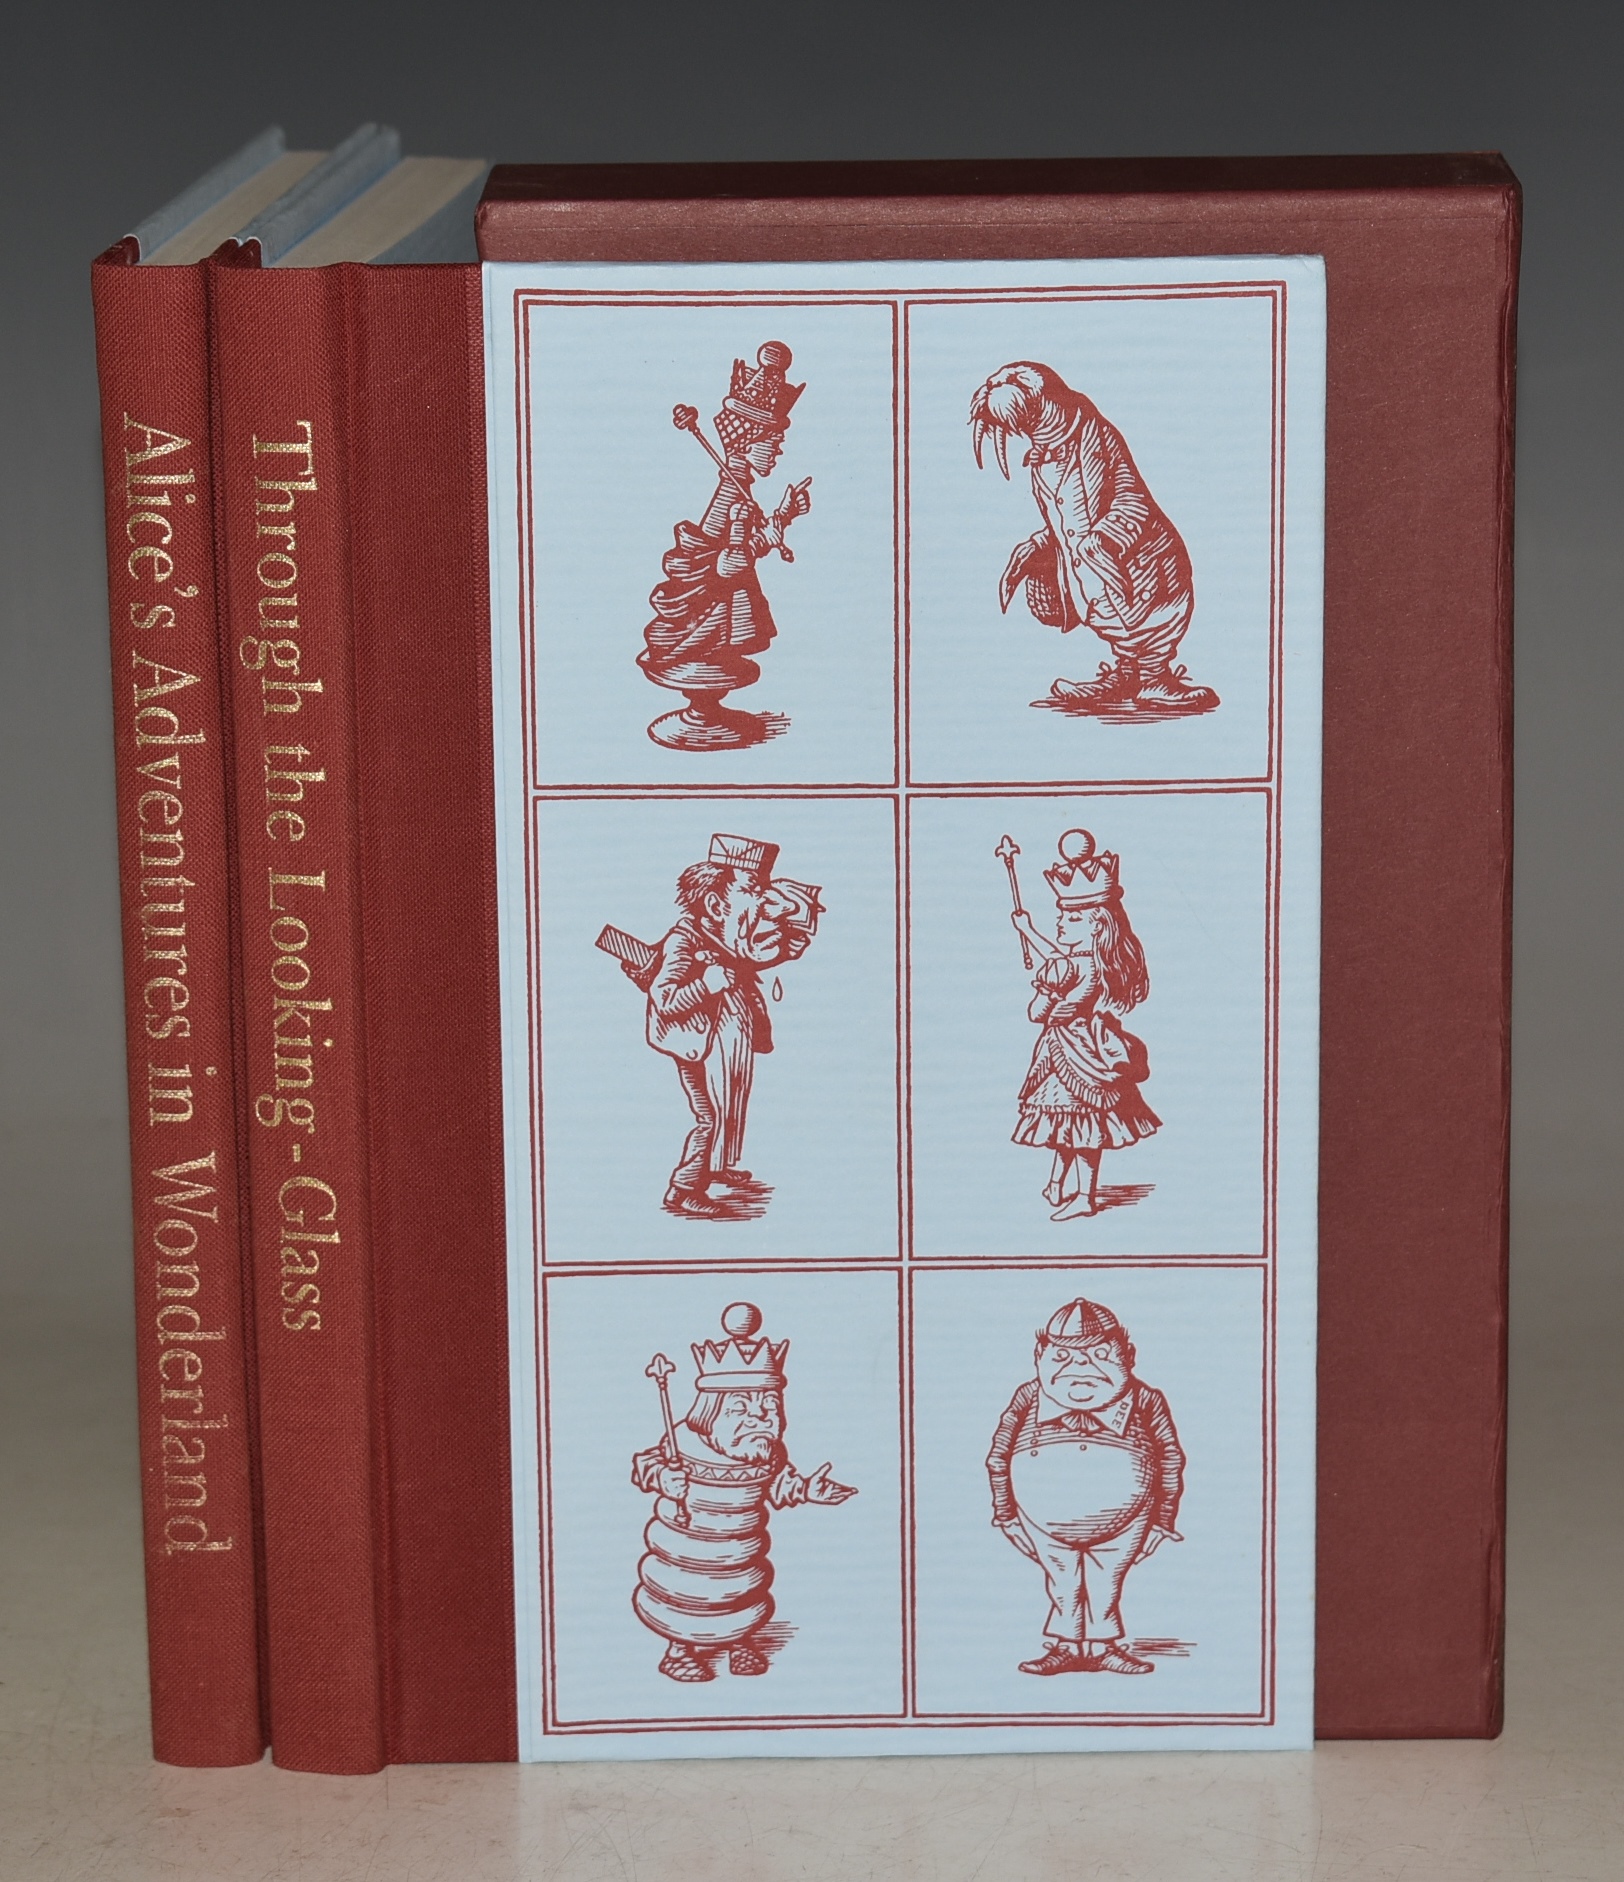 the　in　in　And　Wonderland.　Adventures　Alice's　Two　Volumes　Through　Looking-Glass.　Slipcase.